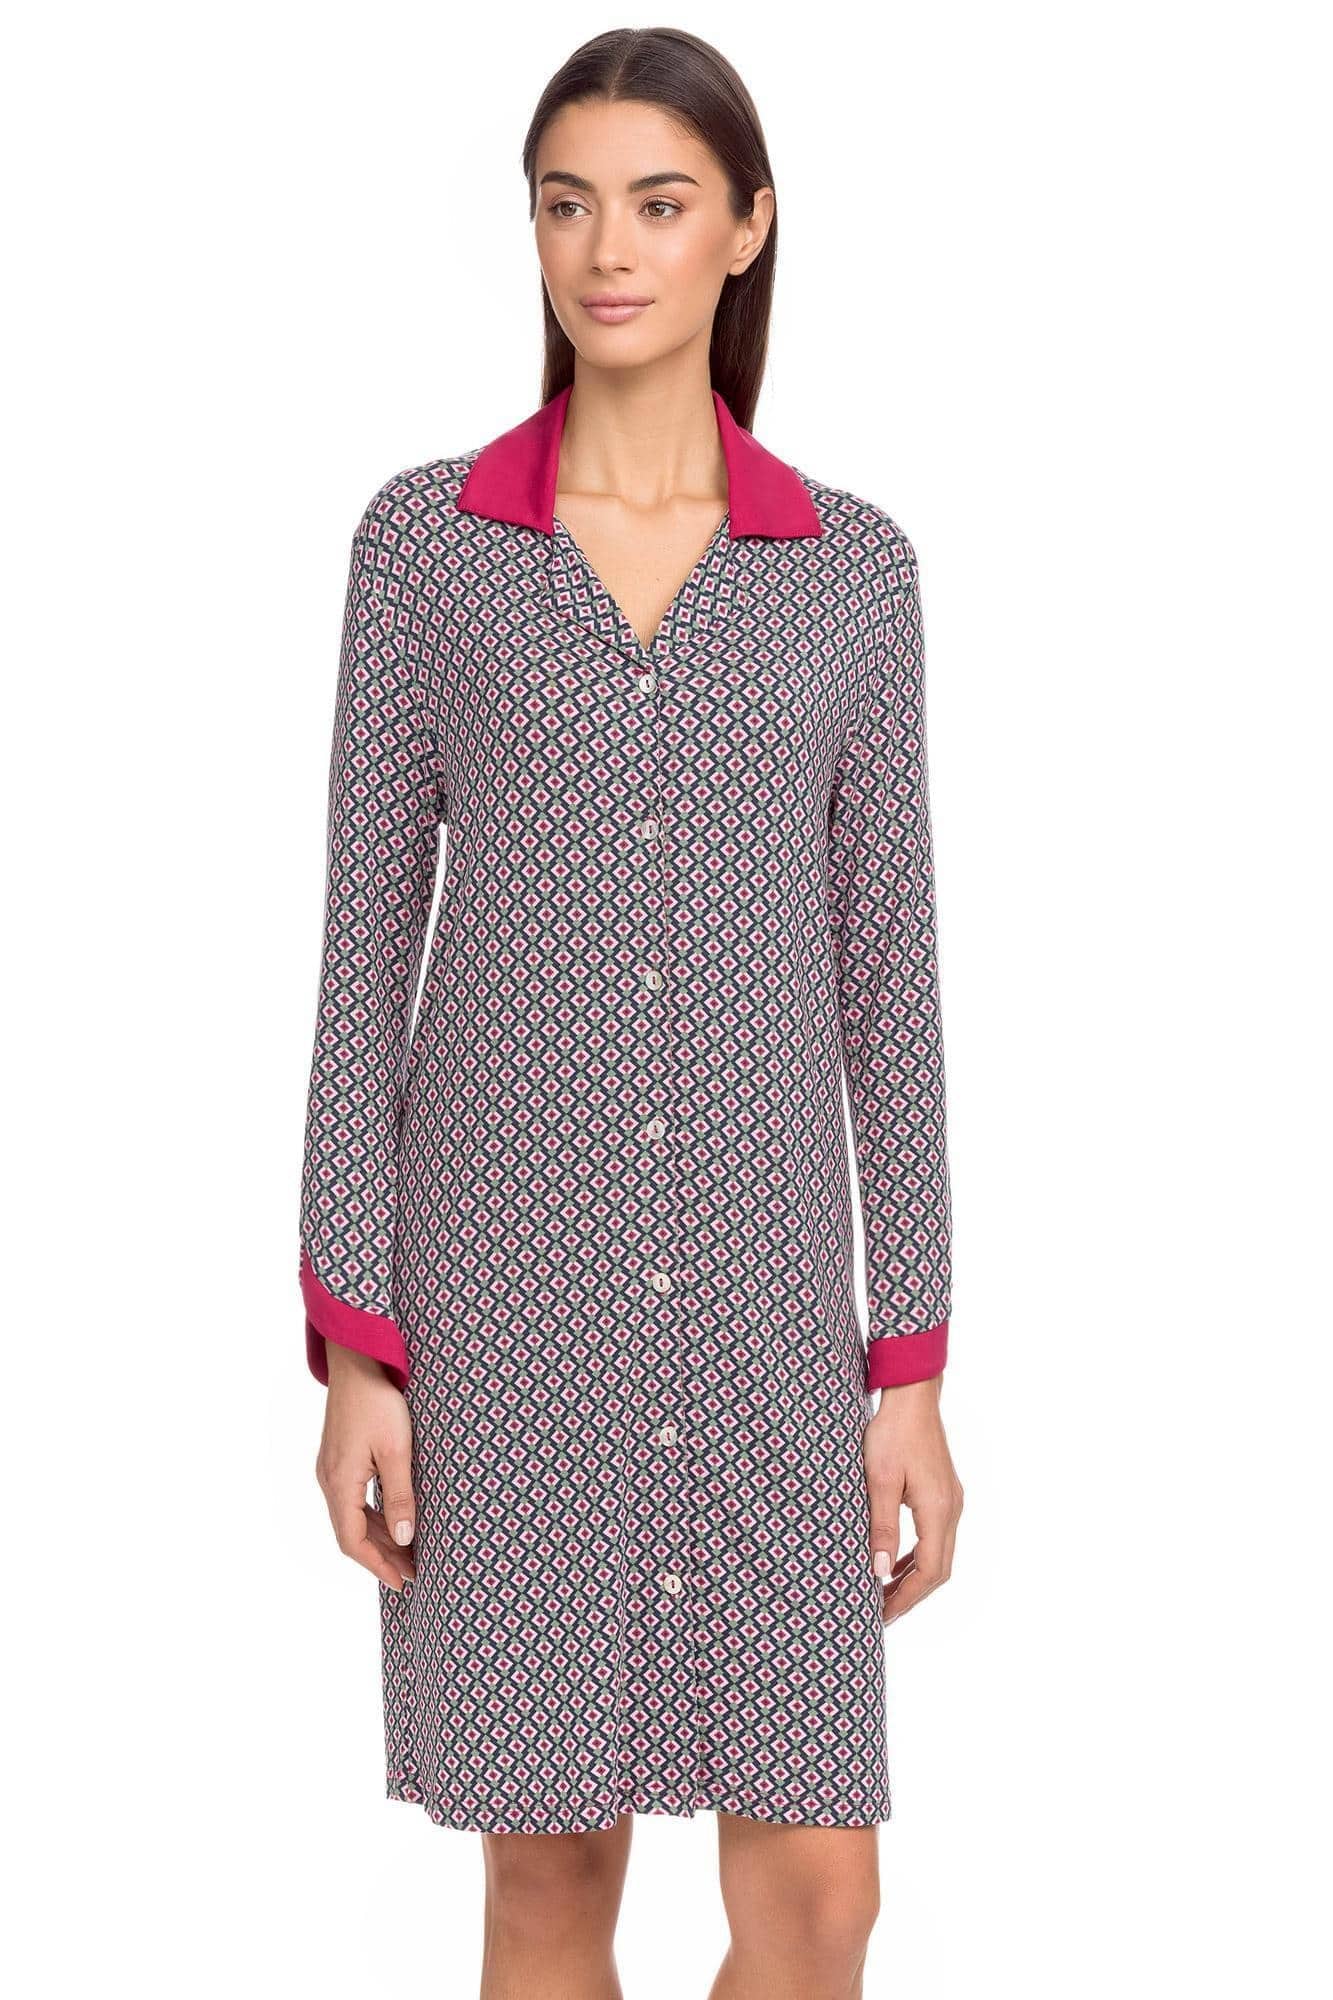 Women’s buttoned Nightgown